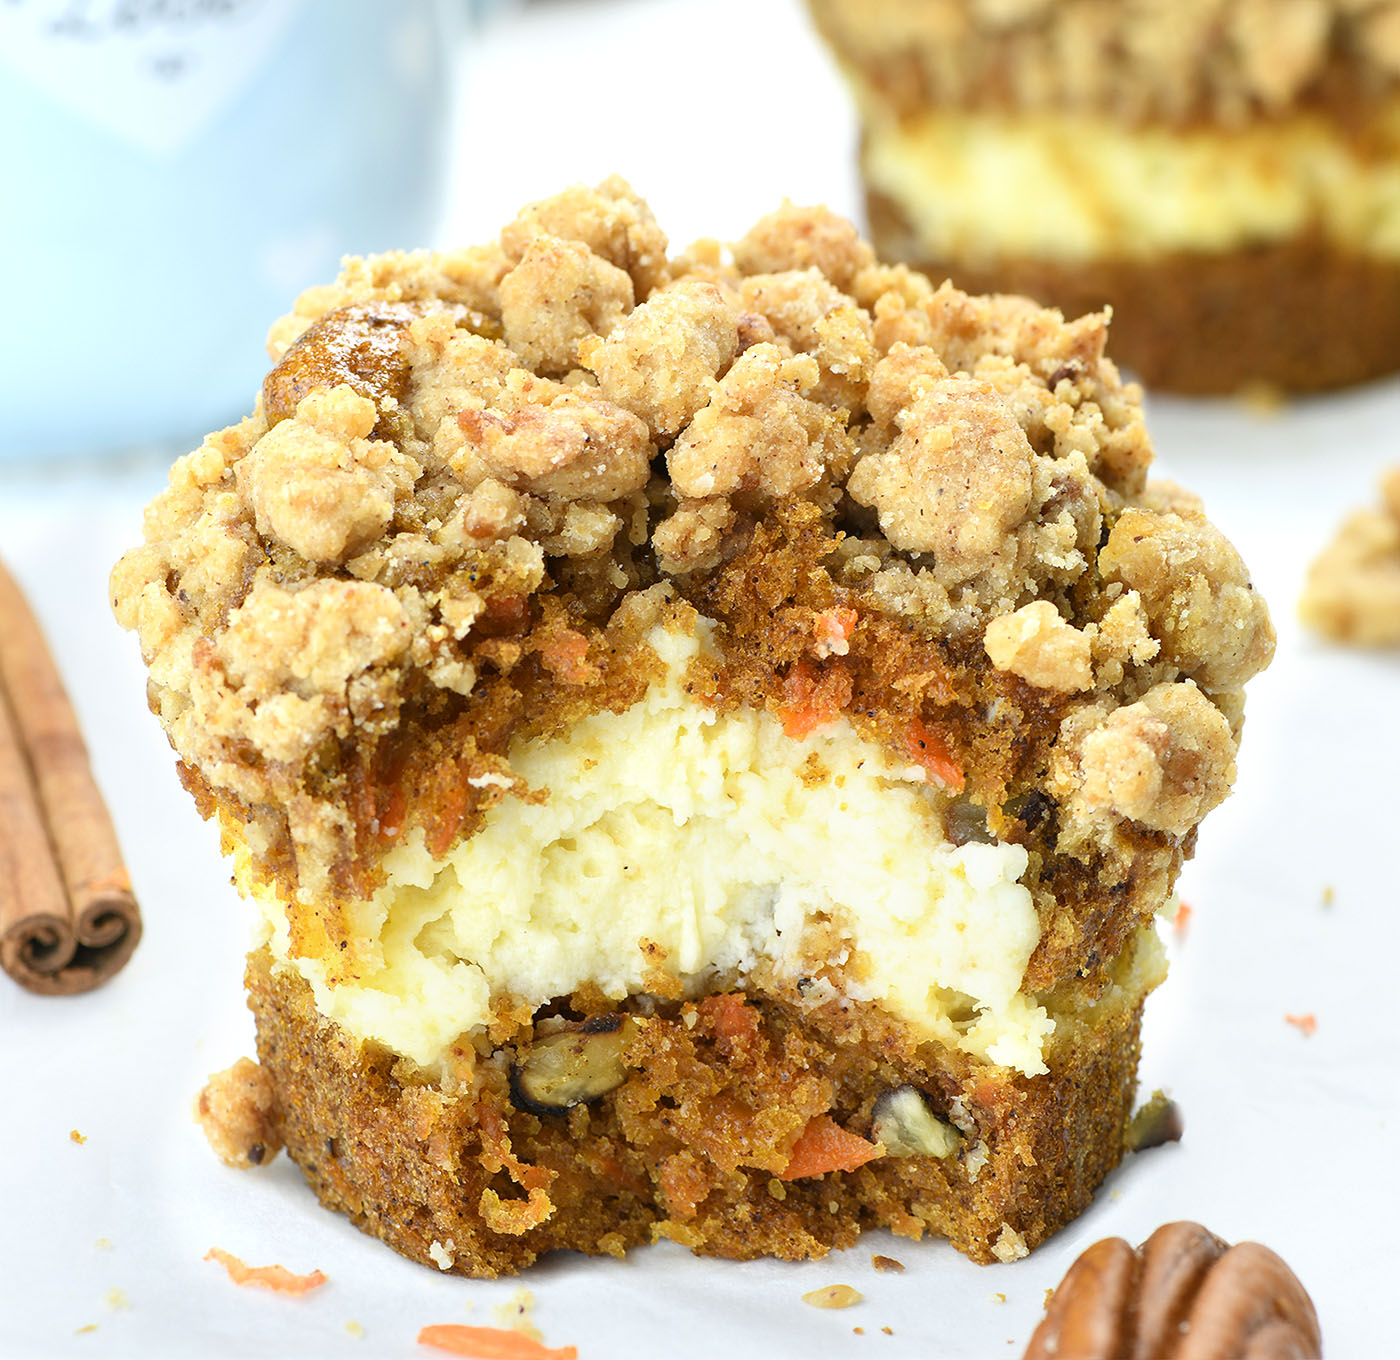 Mini carrot cake cheesecake with a streusel topping and pecan pieces, displayed on a white surface with additional cakes and a blue mug in the background.